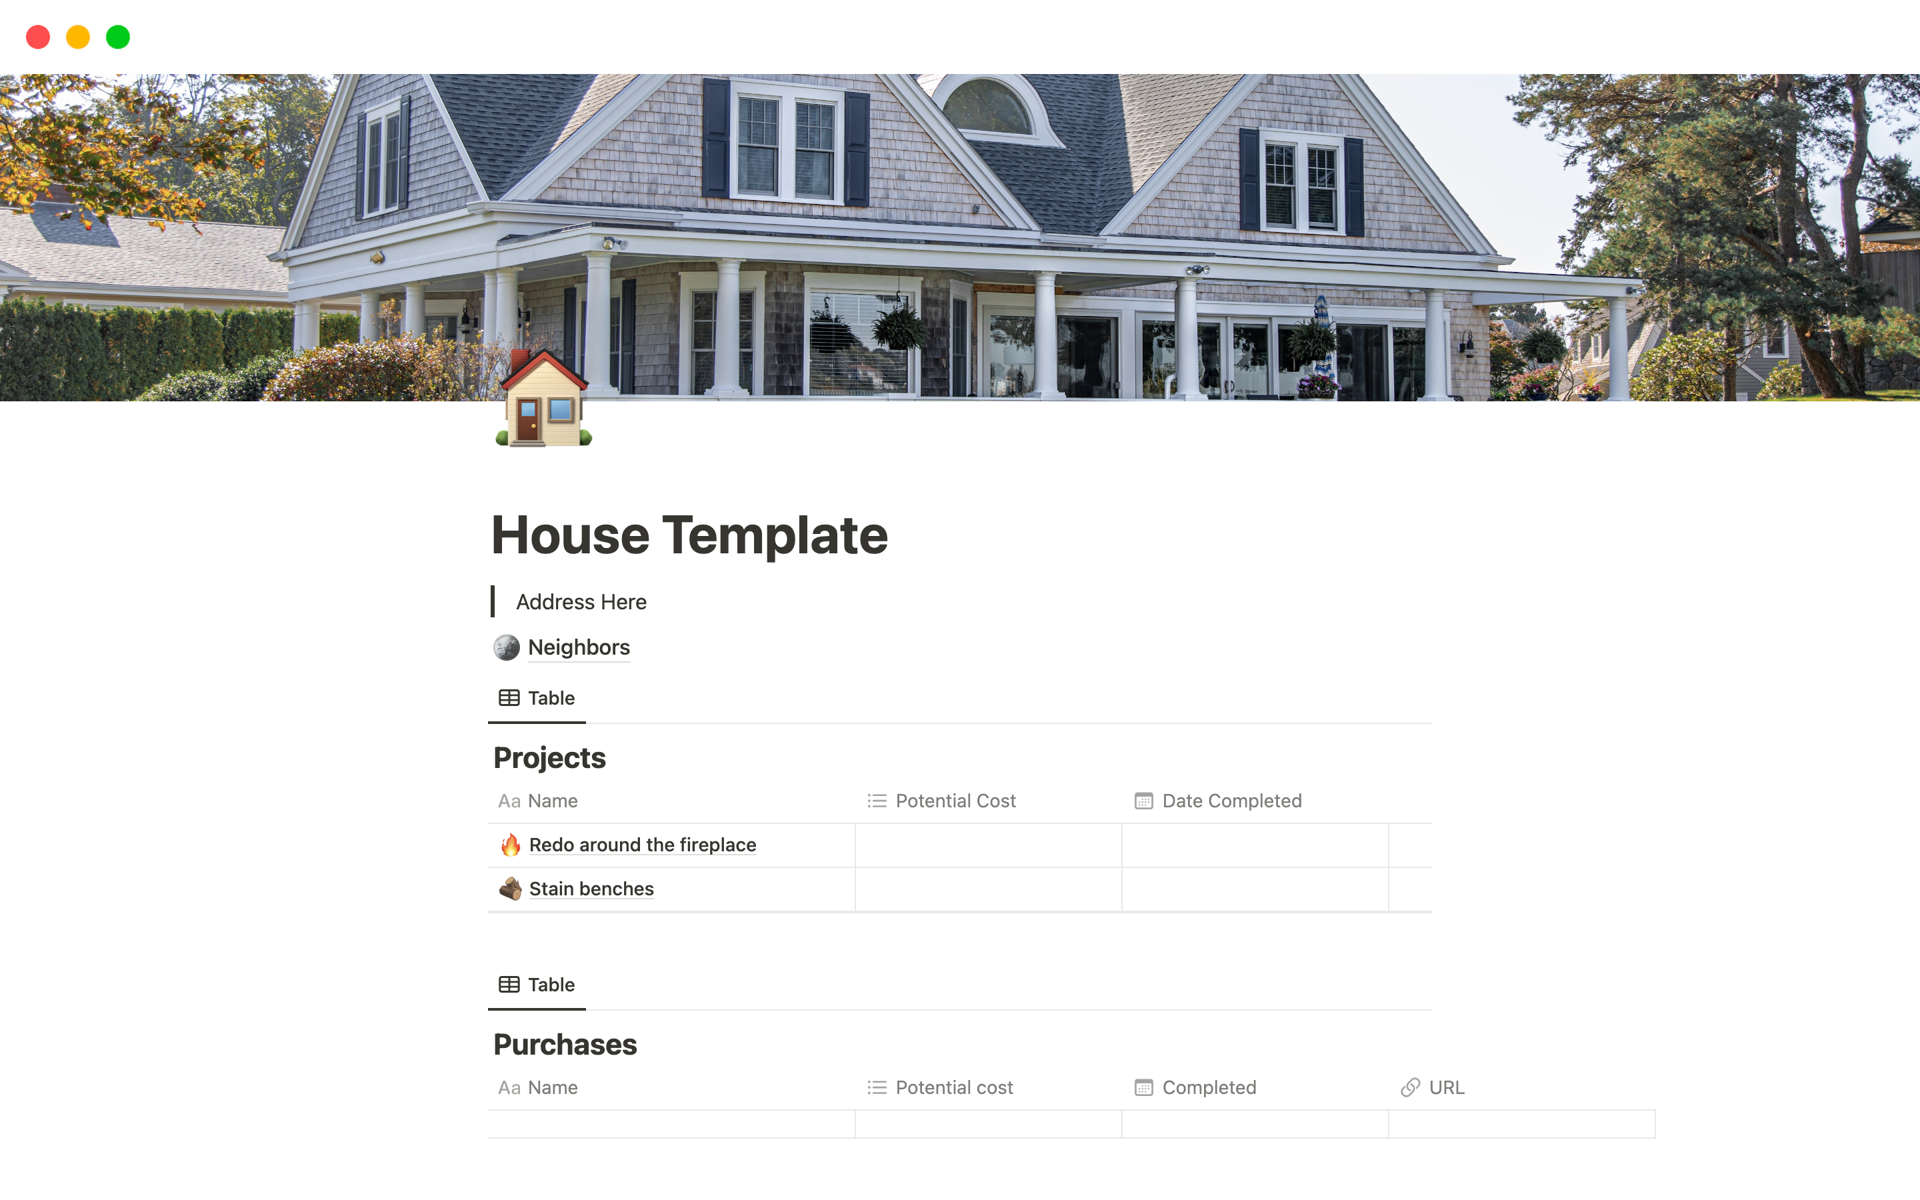 This house tracker helps you to keep track of everything you need to maintain your house.